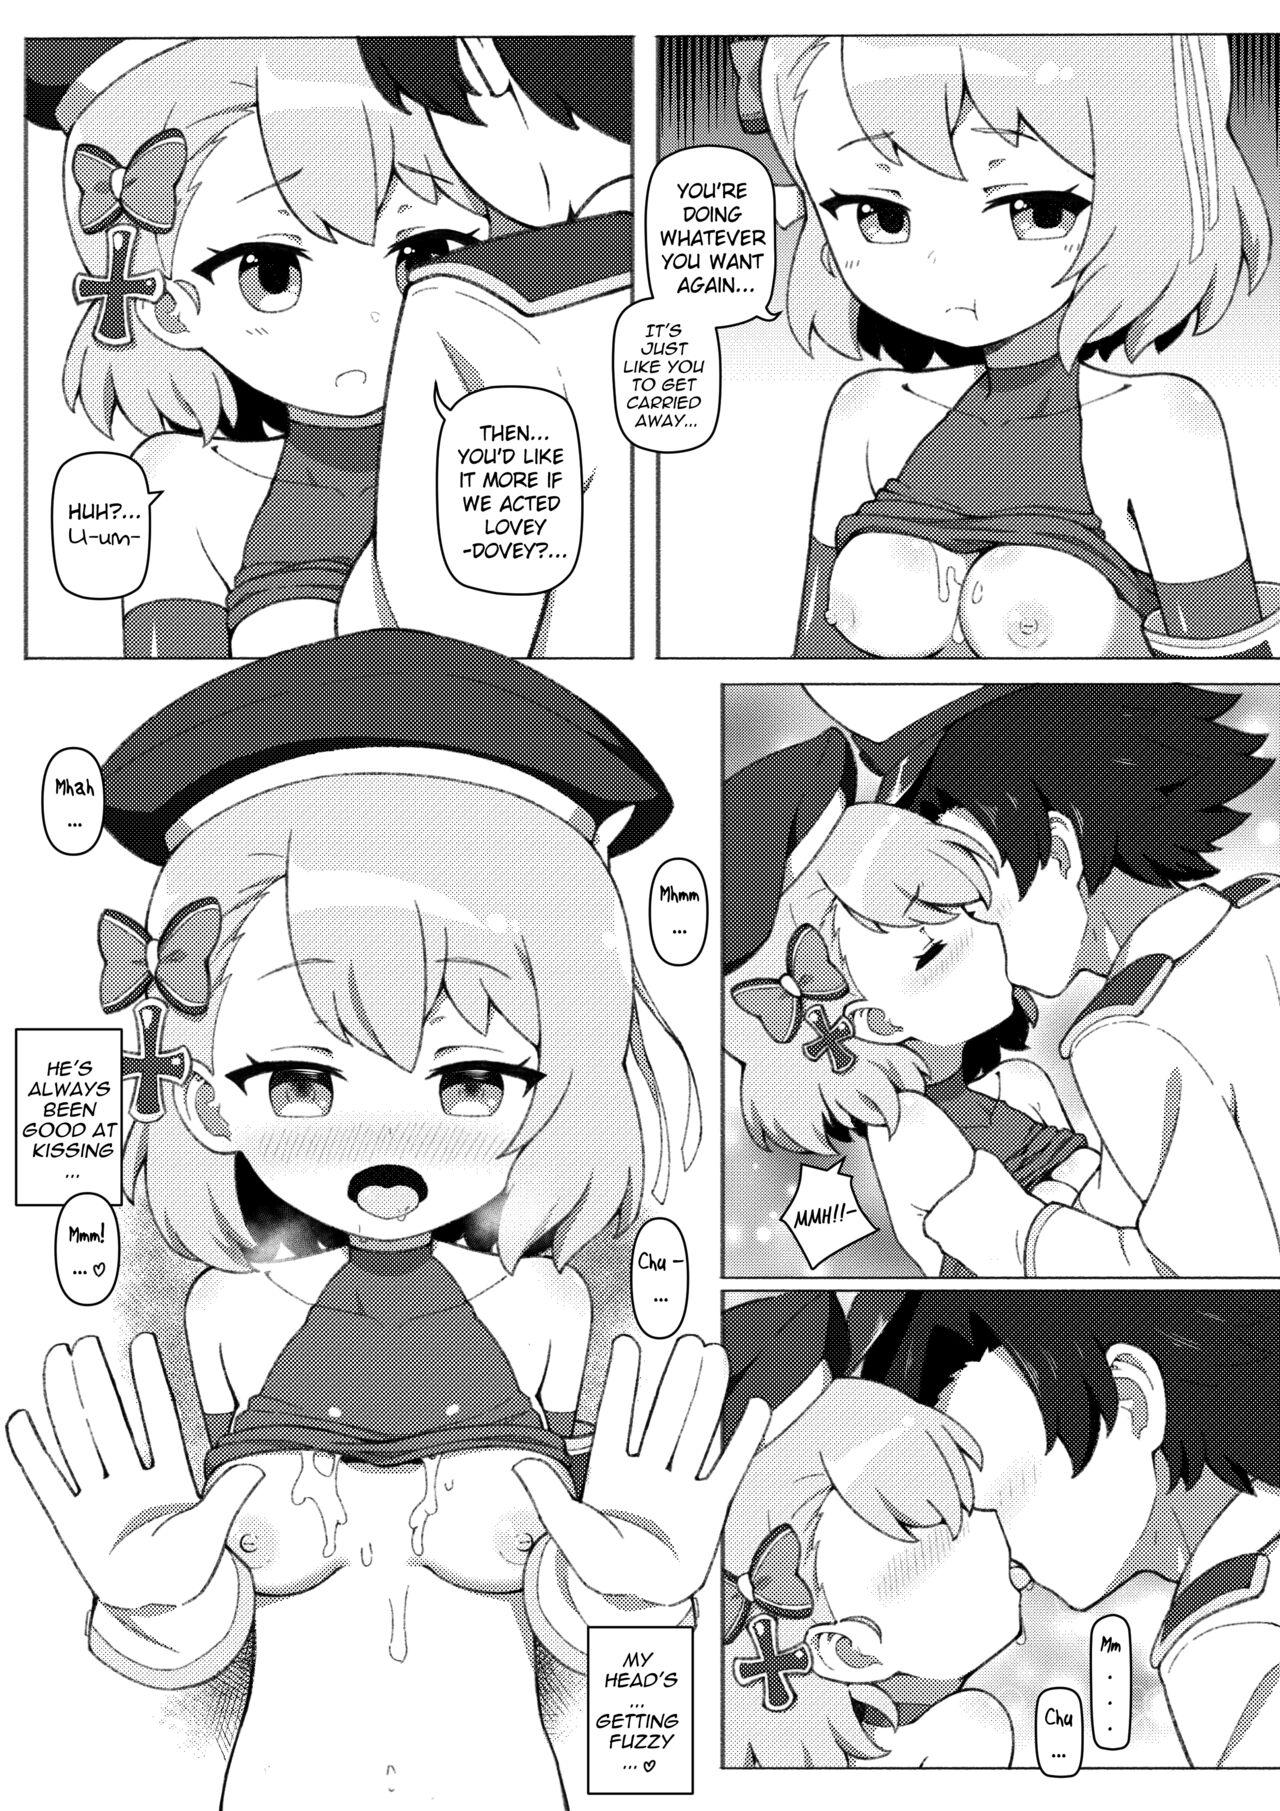 Hot Girl Pussy Secret Time With Z23 - Azur lane Home - Page 6